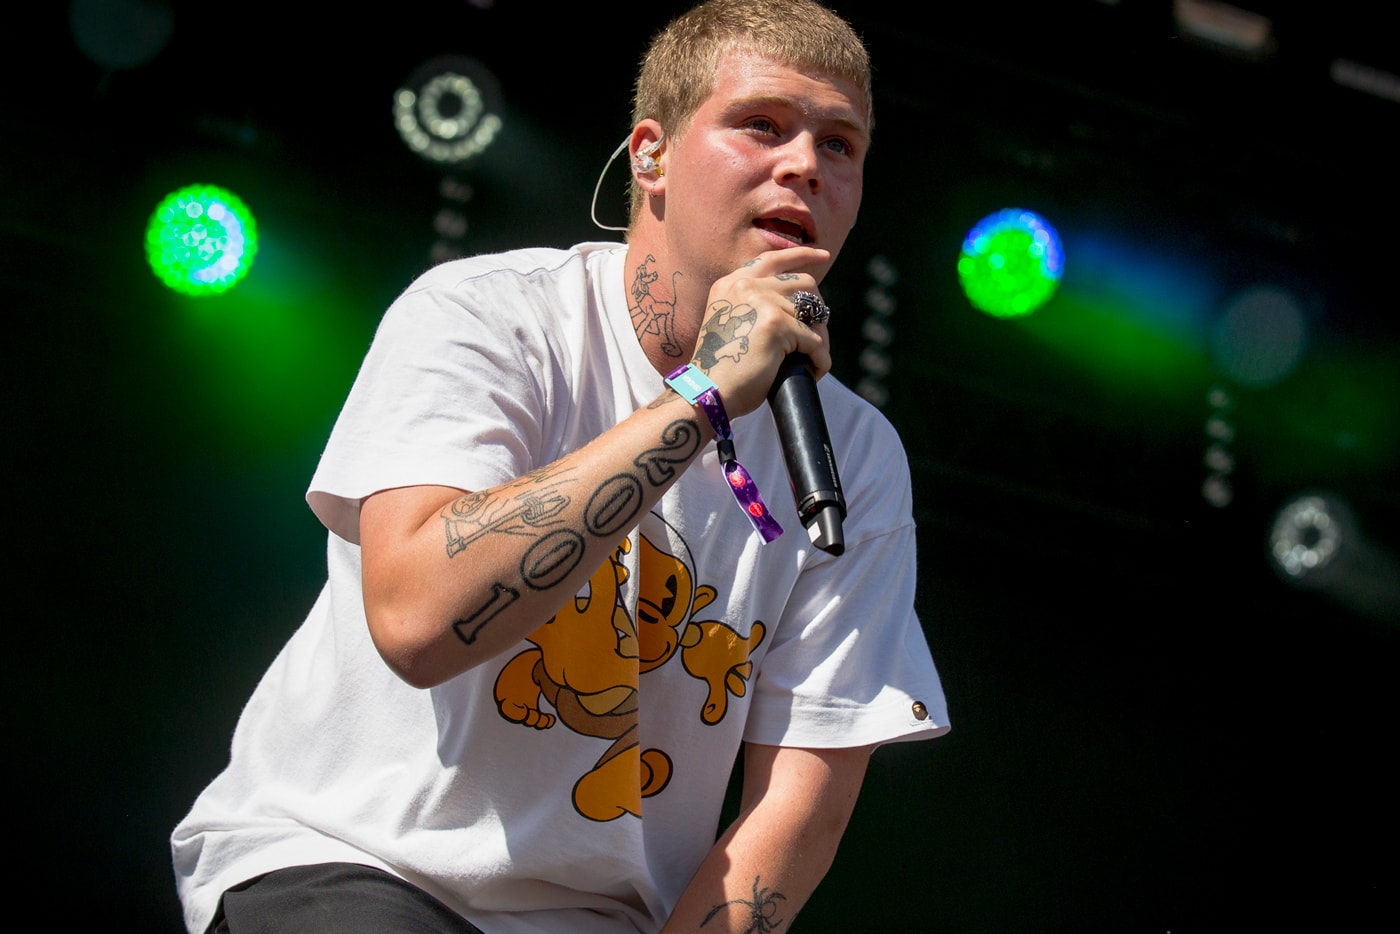 yung-lean-sharse-new-music-video-for-miami-ultras